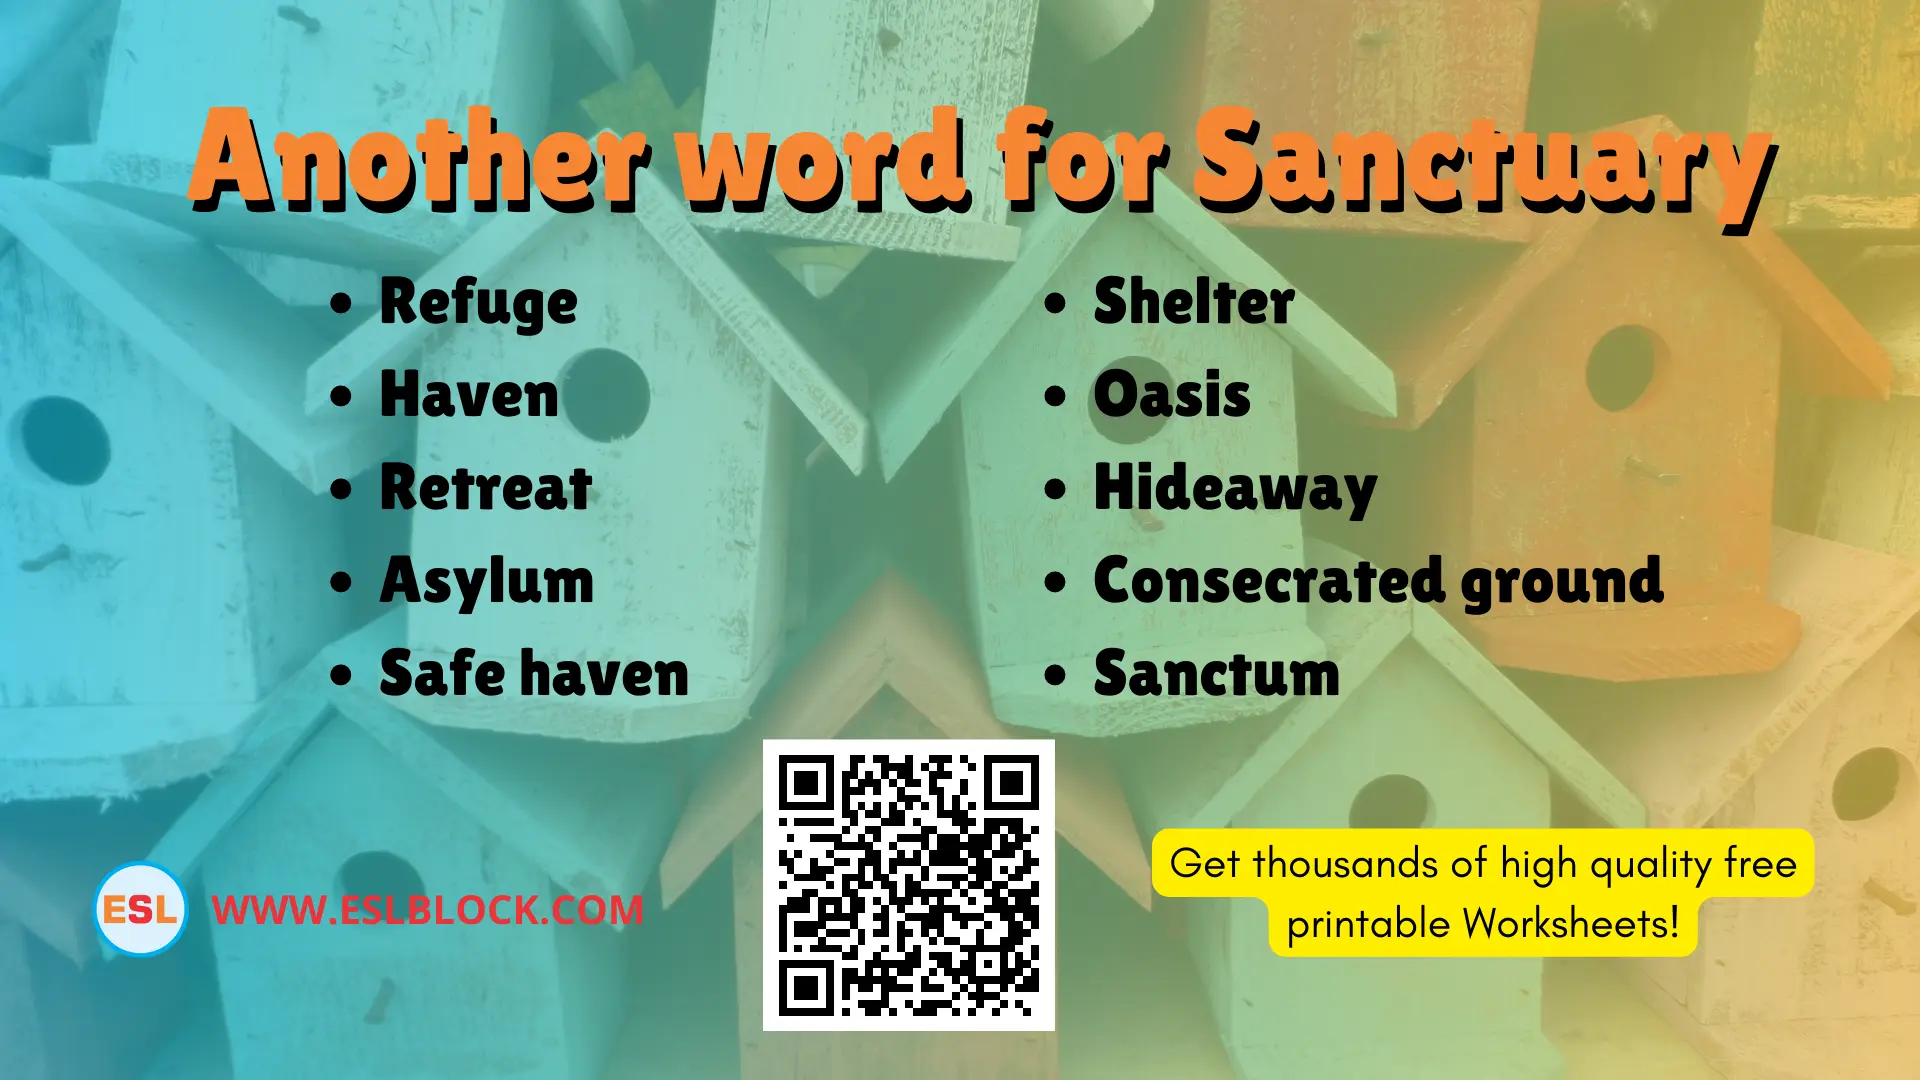 What is another word for Sanctuary